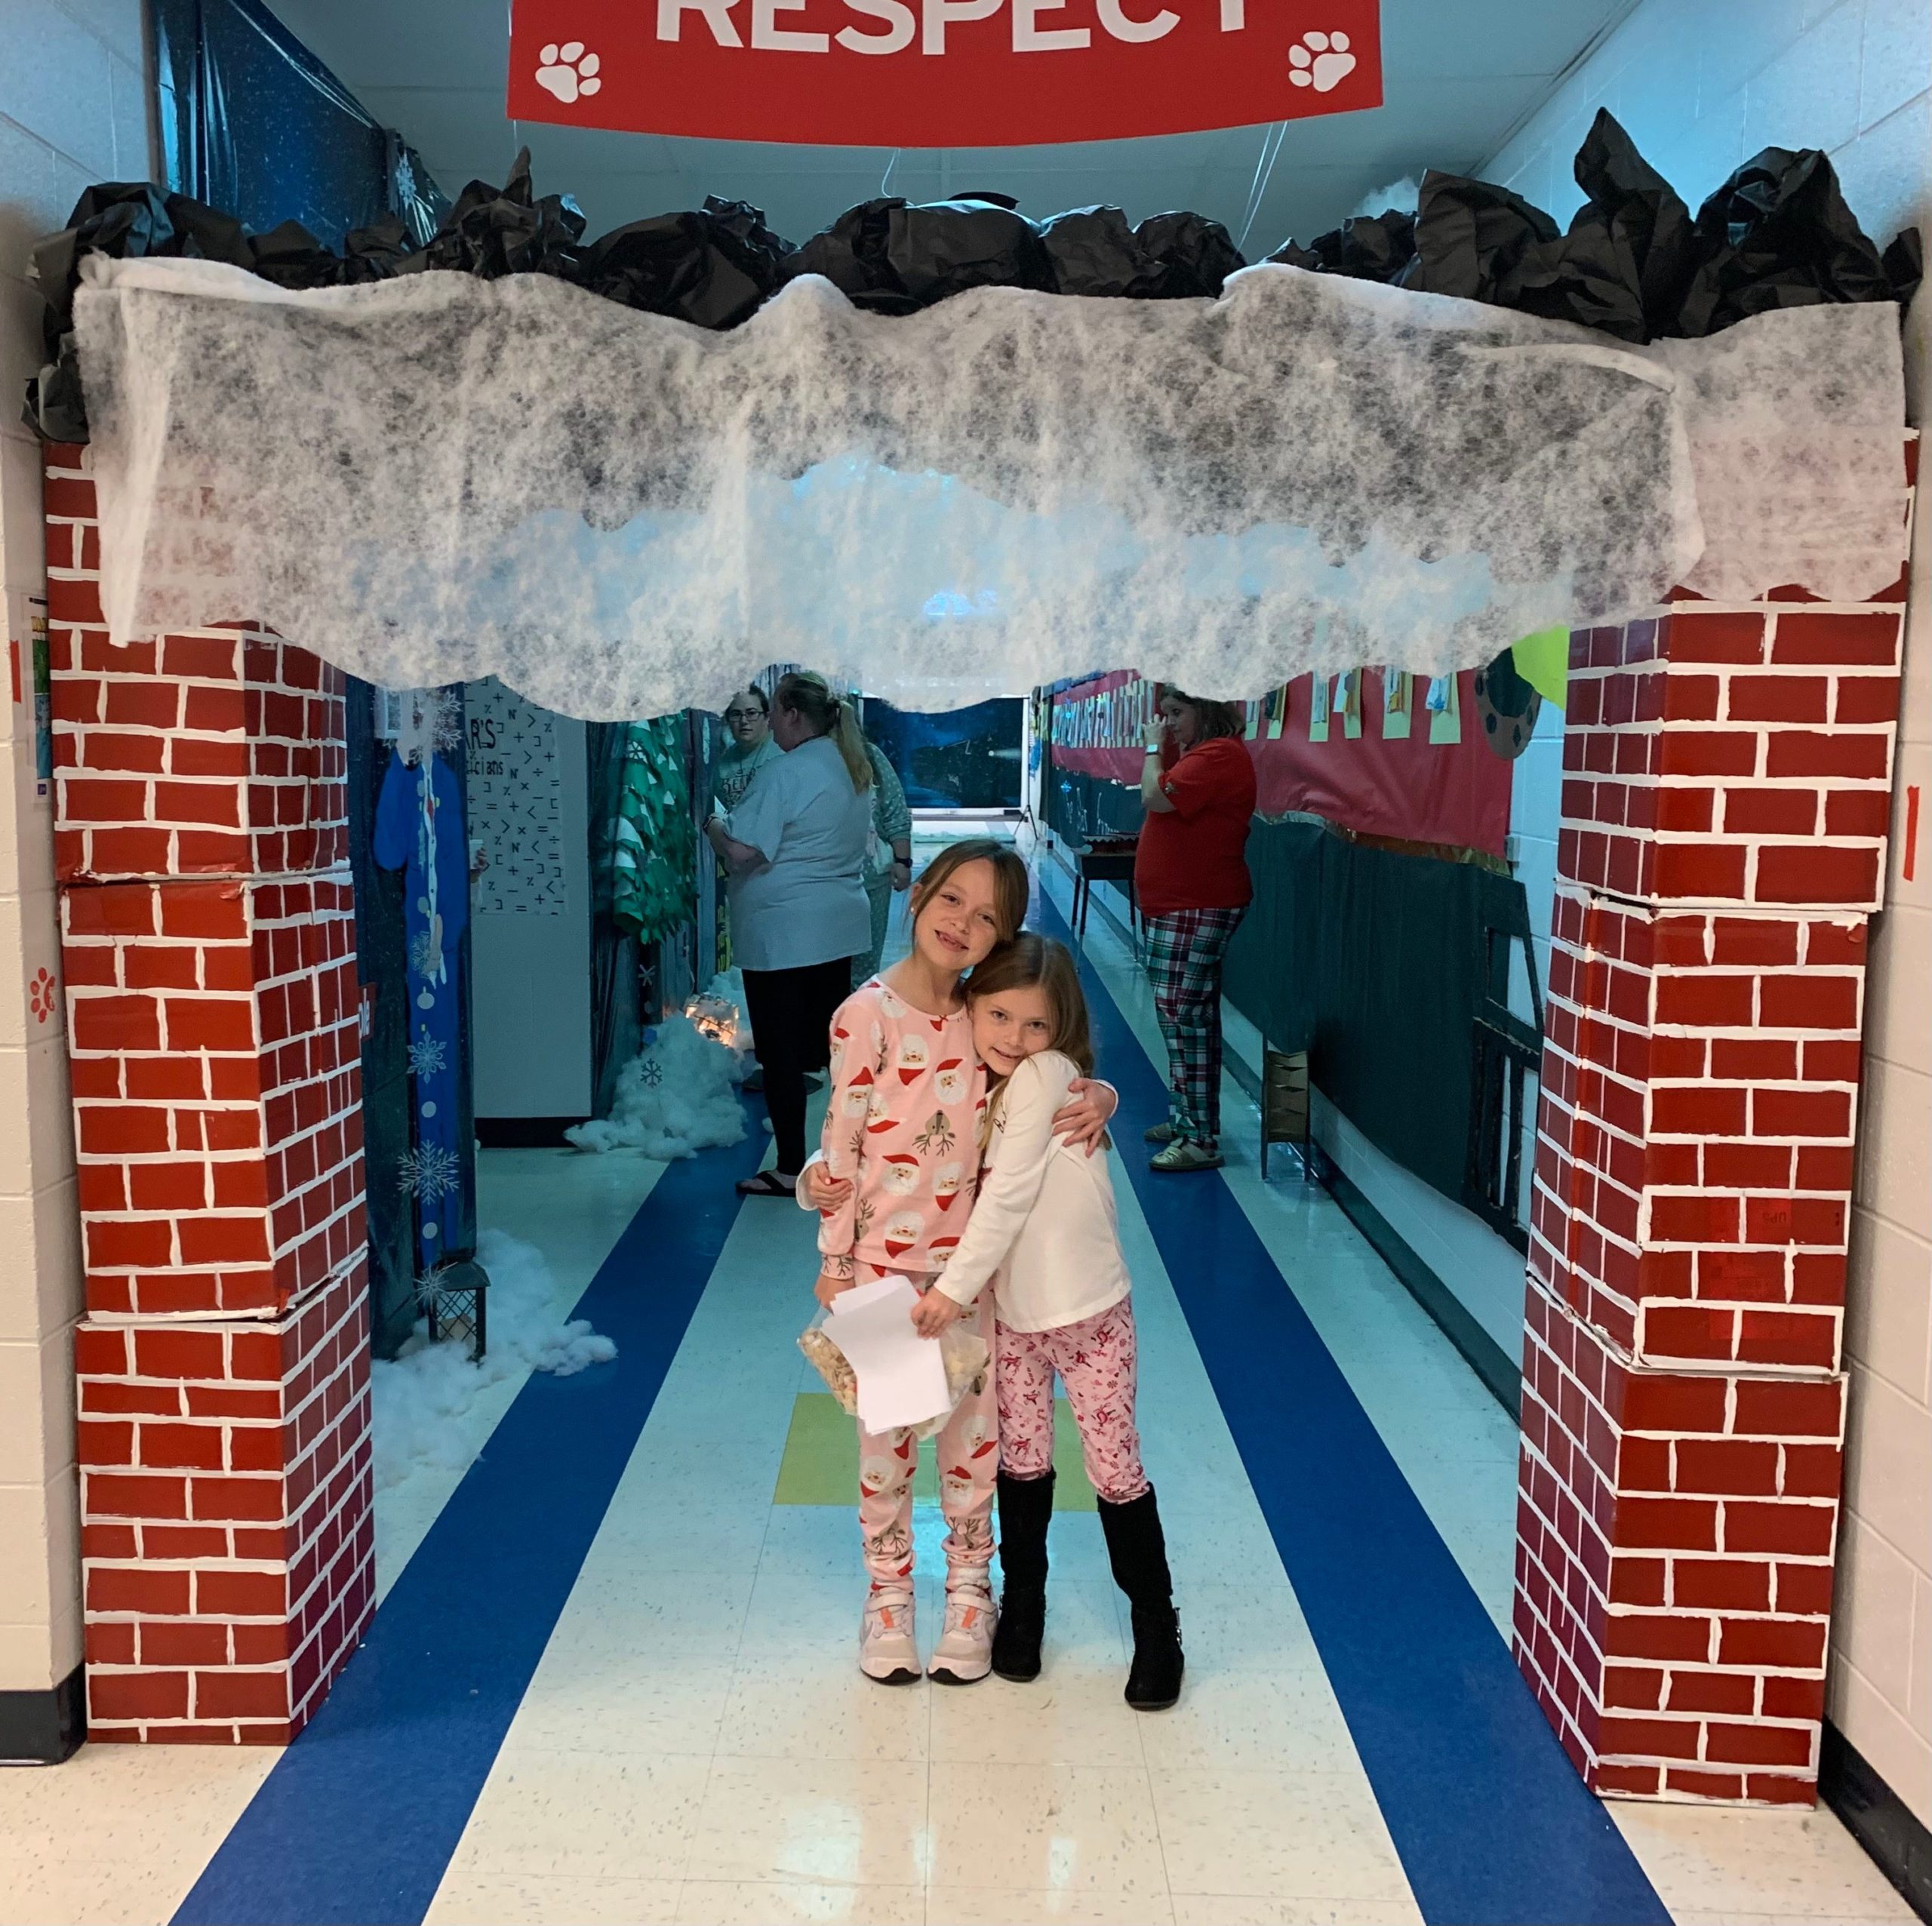 Bagdad Elementary School held a family literacy night Dec. 14. More than 400 parents and students turned out for this event that incorporated literacy and math activities for parents and students.